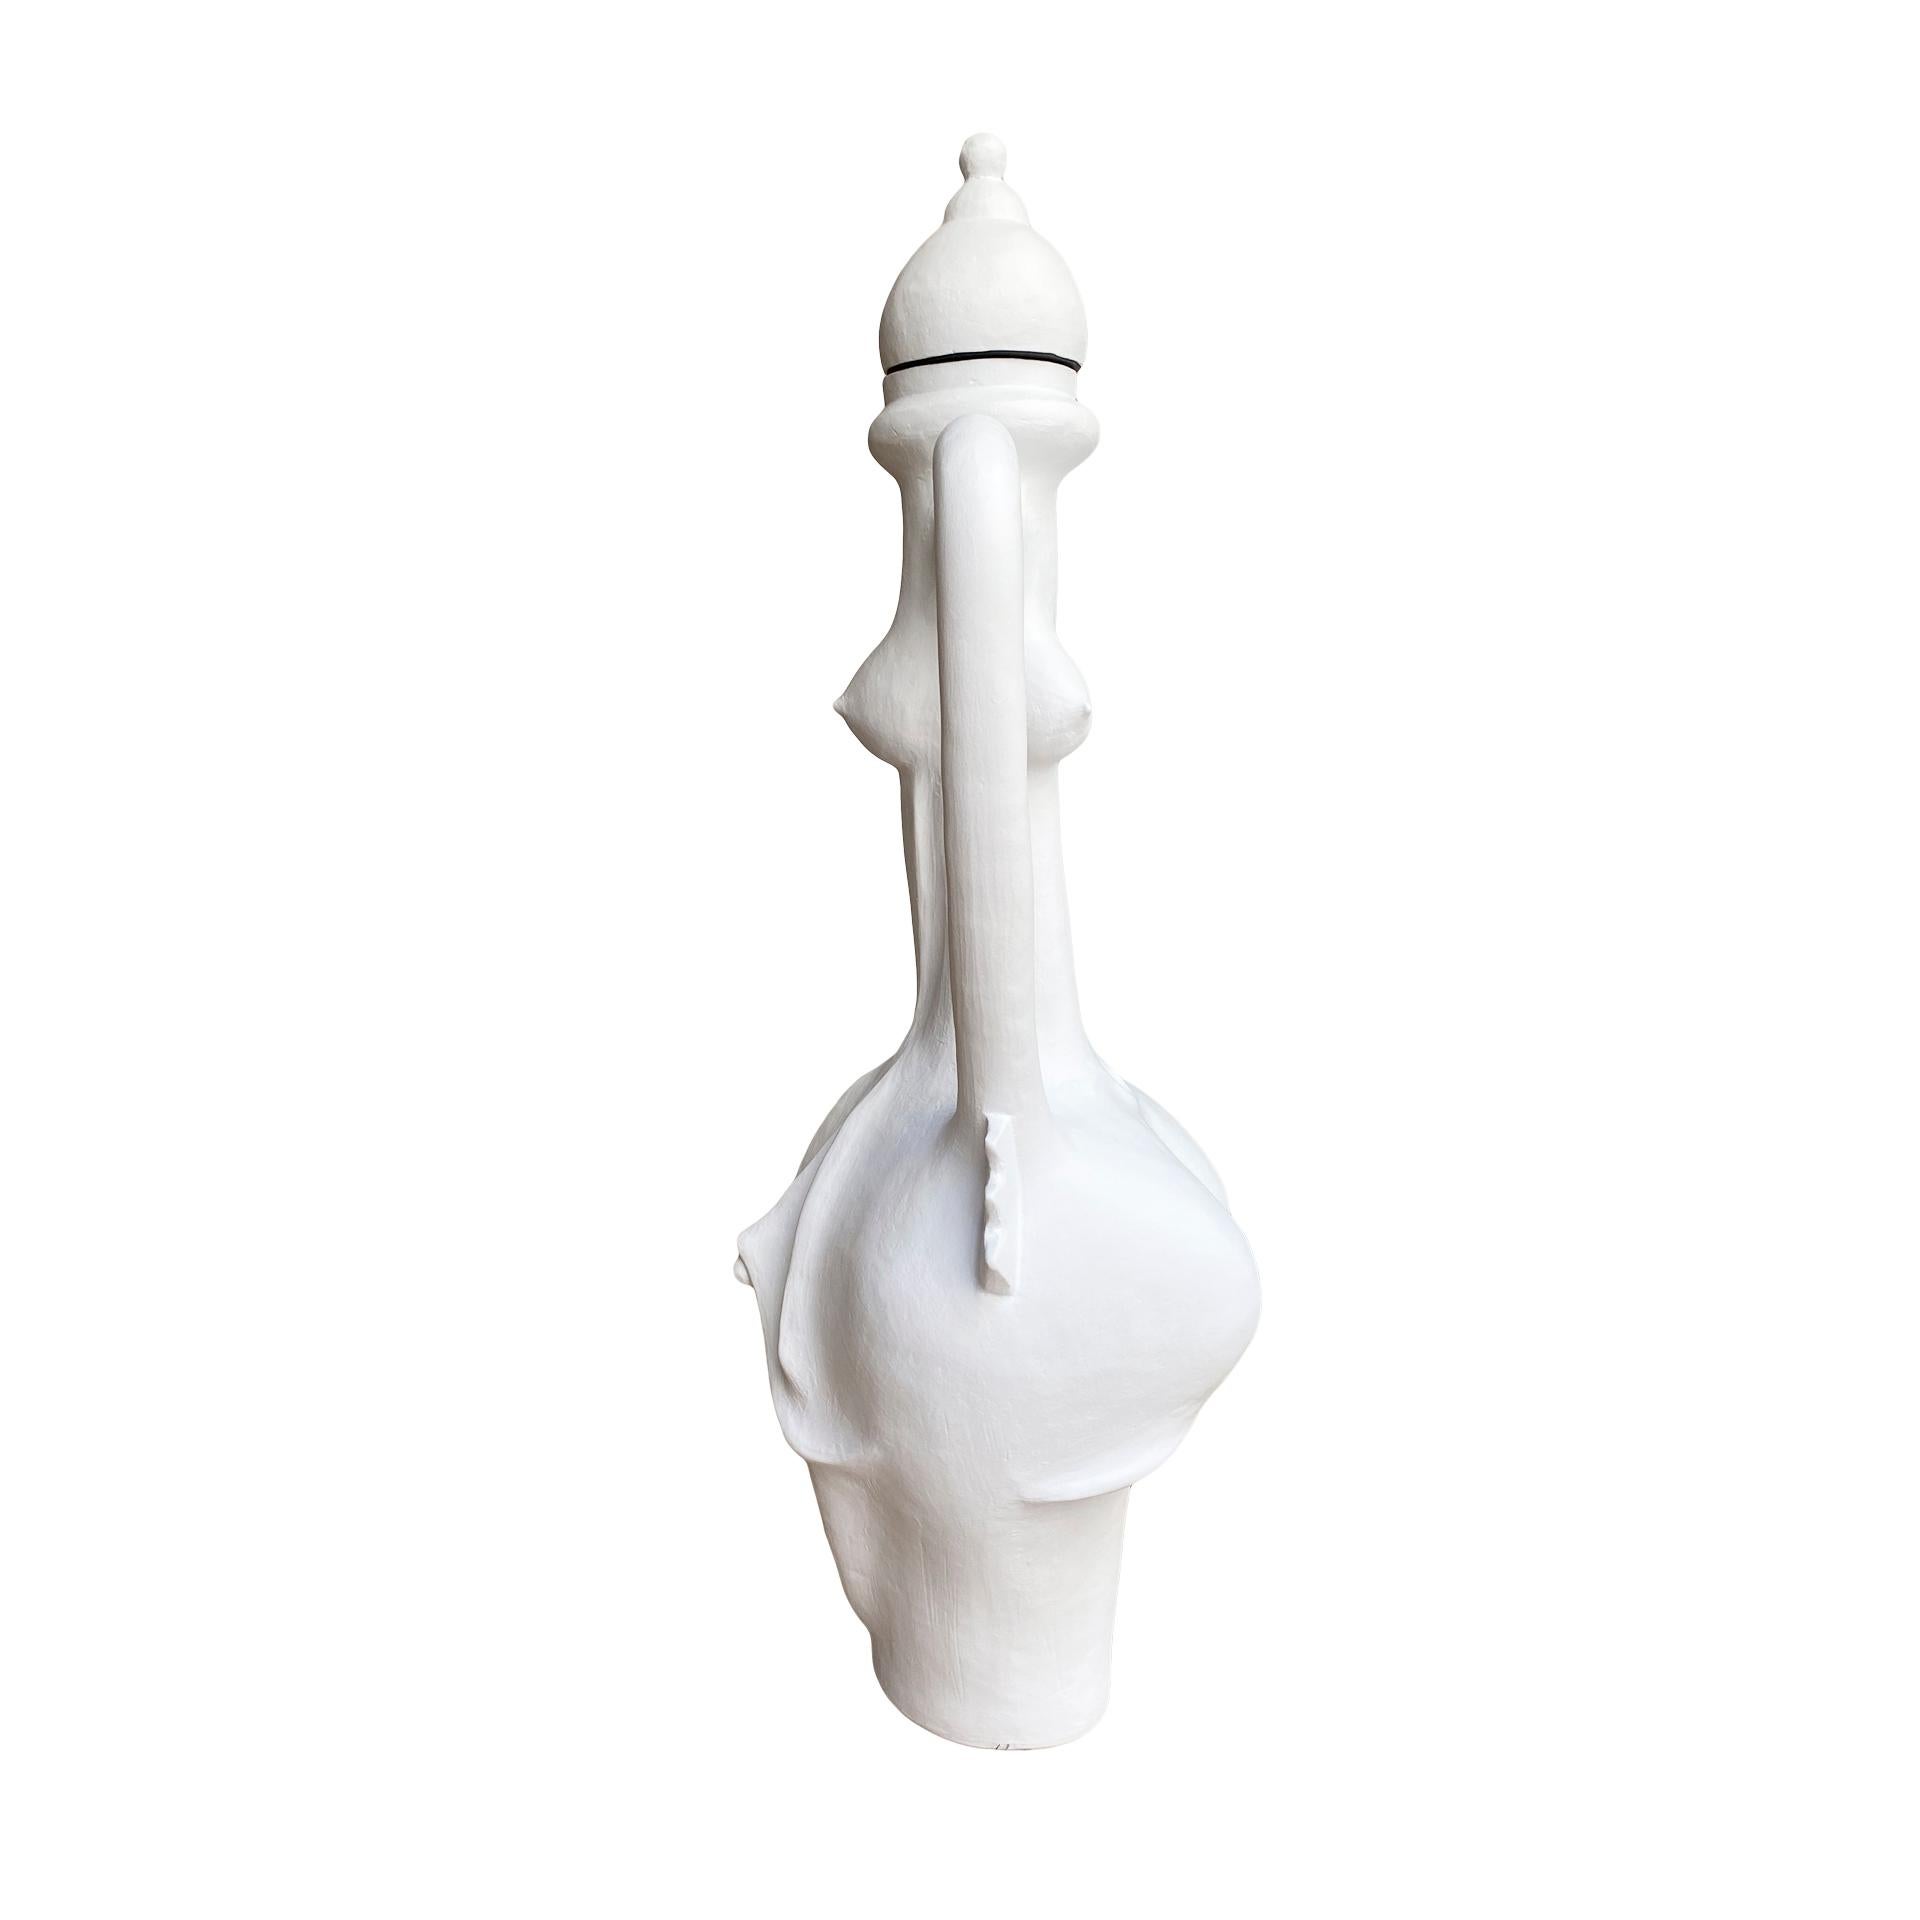 Amphora sculpture with Vulva by Papin Lucadamo made in refractary clay. 

In his last works Papin Lucadamo analyzes in a conceptual way a synthesis between traditional craftsmanship and motifs reminiscent of the most primitive sculptures such as the